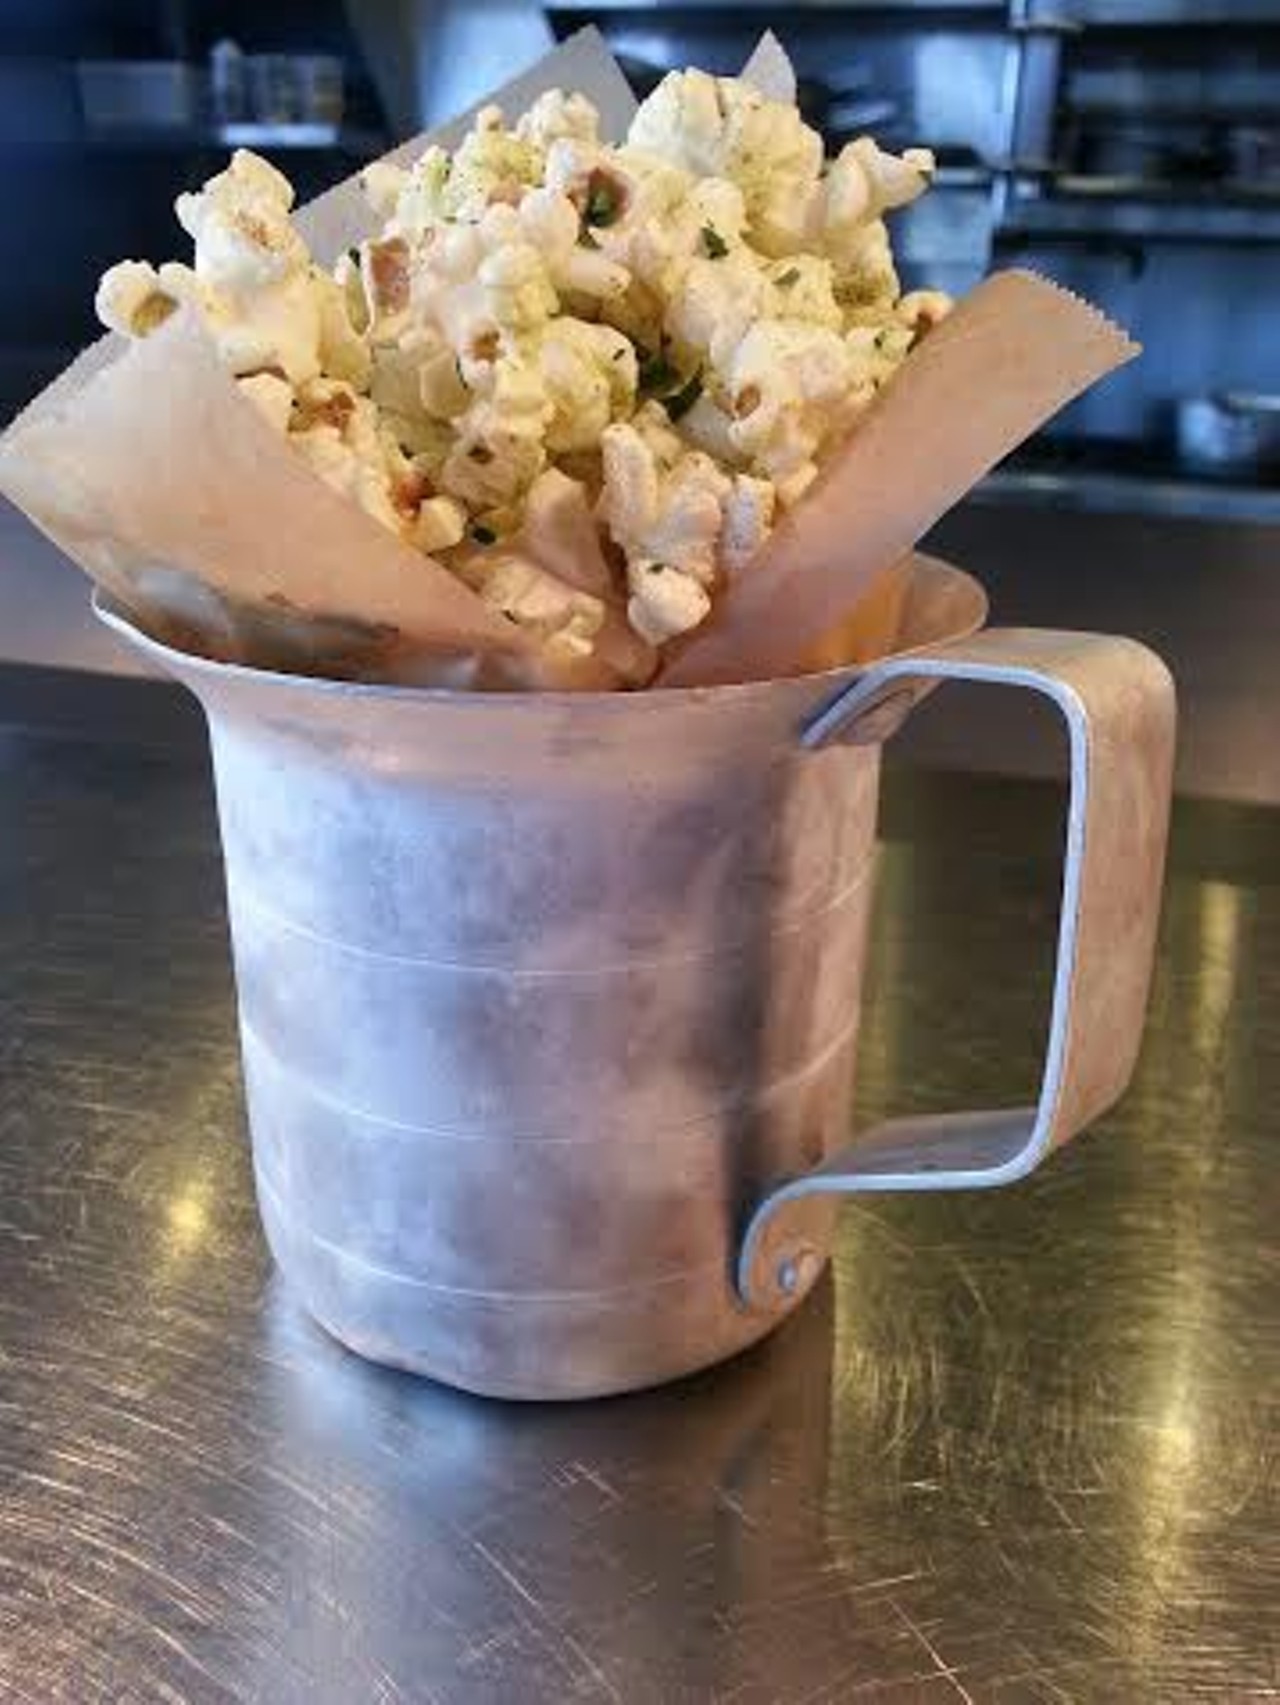 Many versions of popcorn have been popping up lately, but The Willeyville's is the most extreme and delicious. Served on their dinner menu, the spicy phat popcorn is tossed with pork fat, cilantro & jalapeno powder, and lime zest.